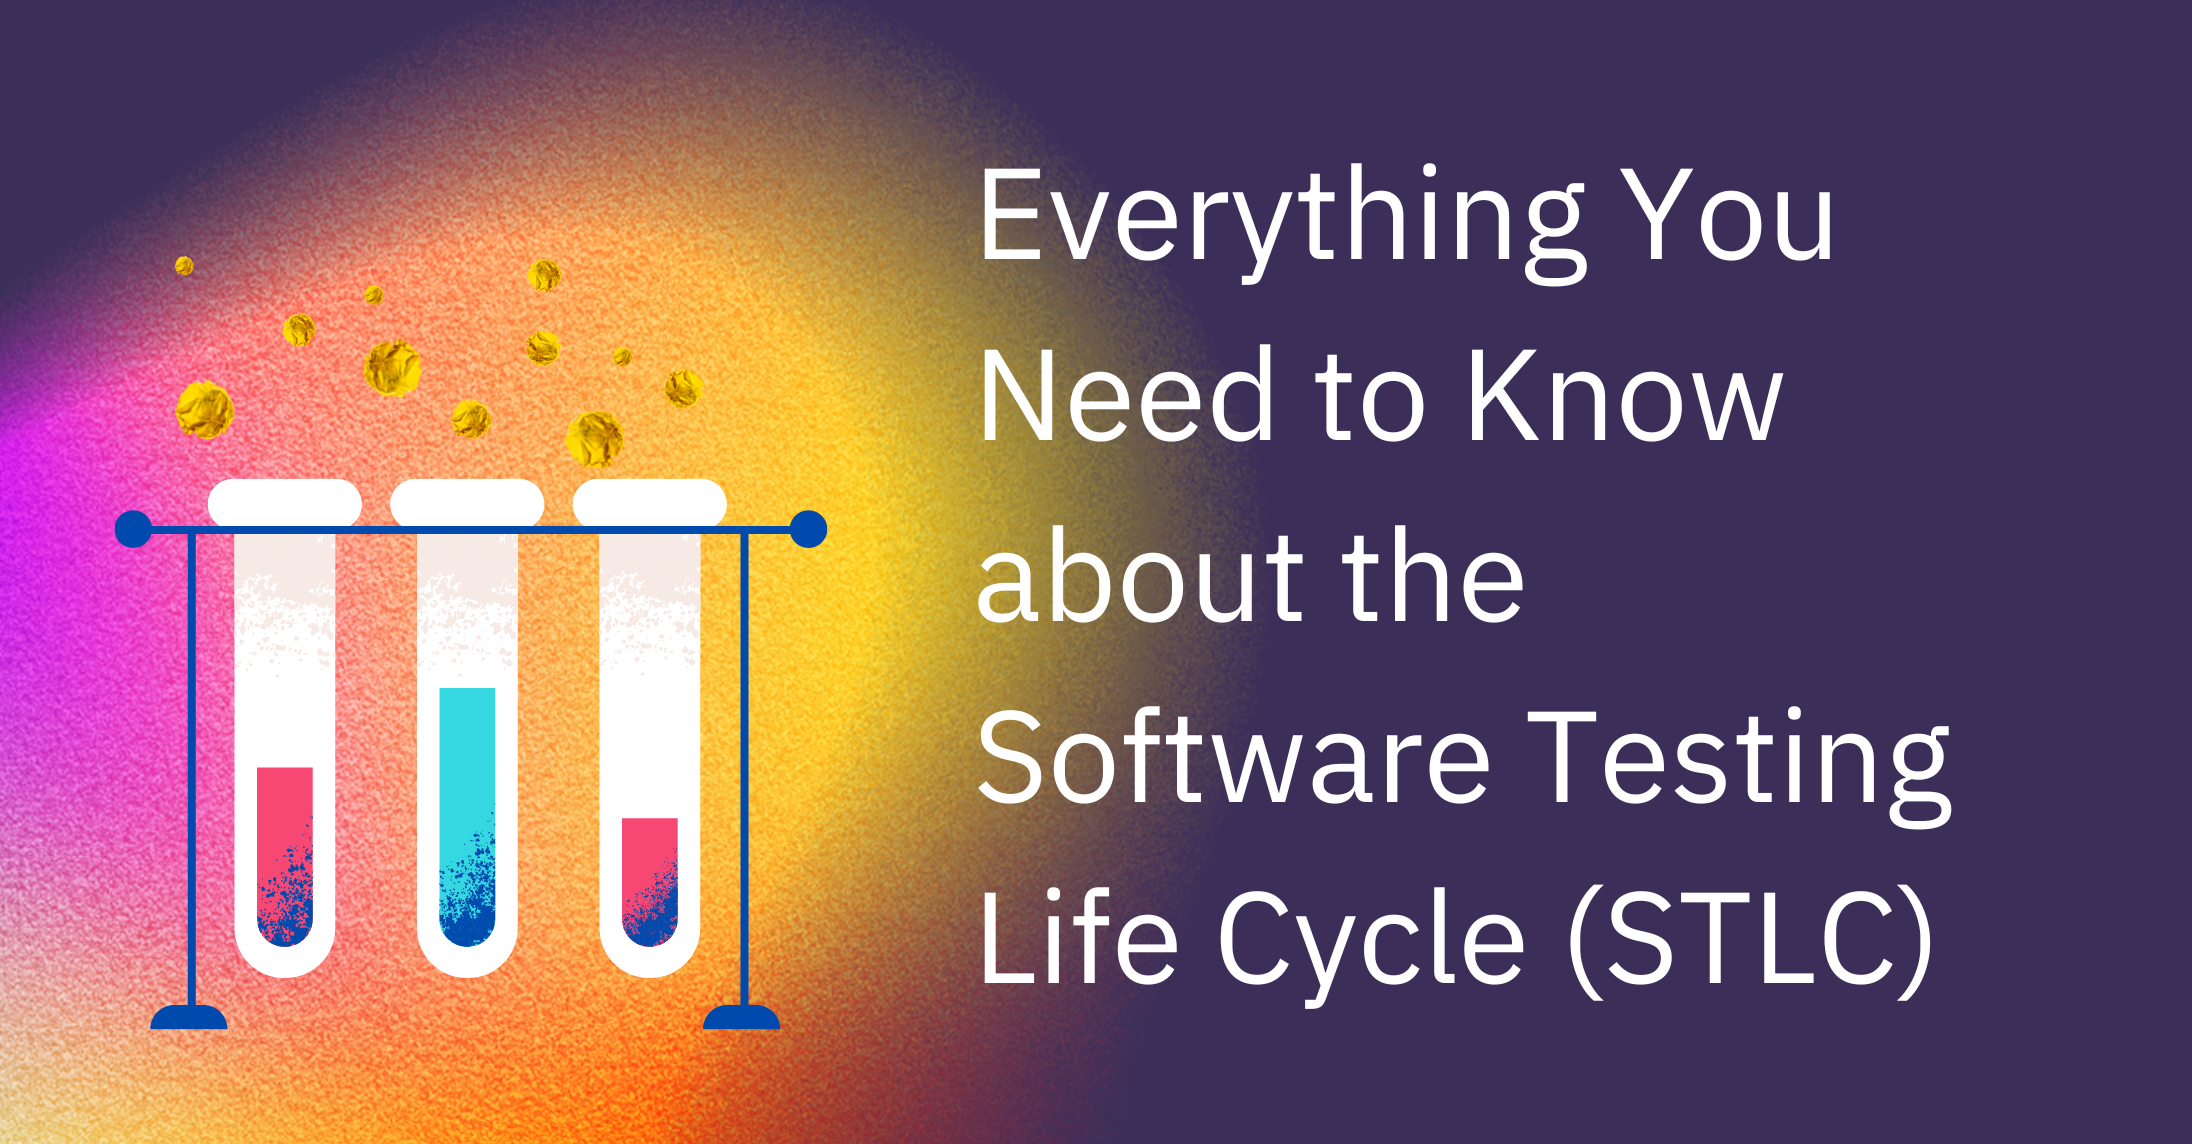 Everything You Need to Know about the Software Testing Life Cycle (STLC)